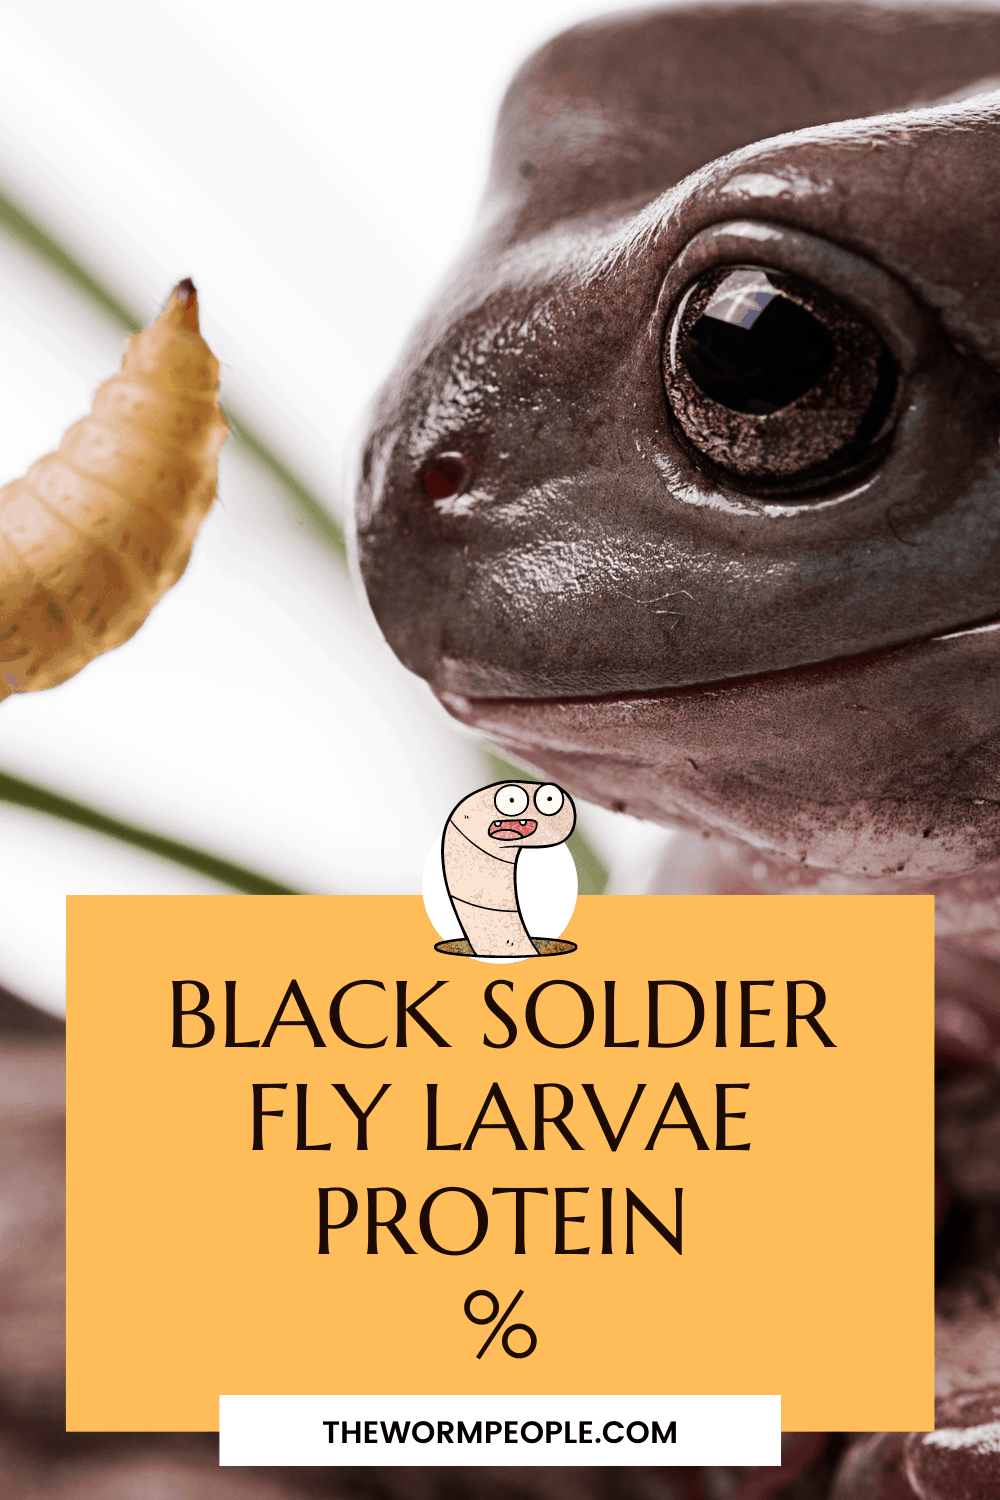 Black Soldier Fly Larvae Protein